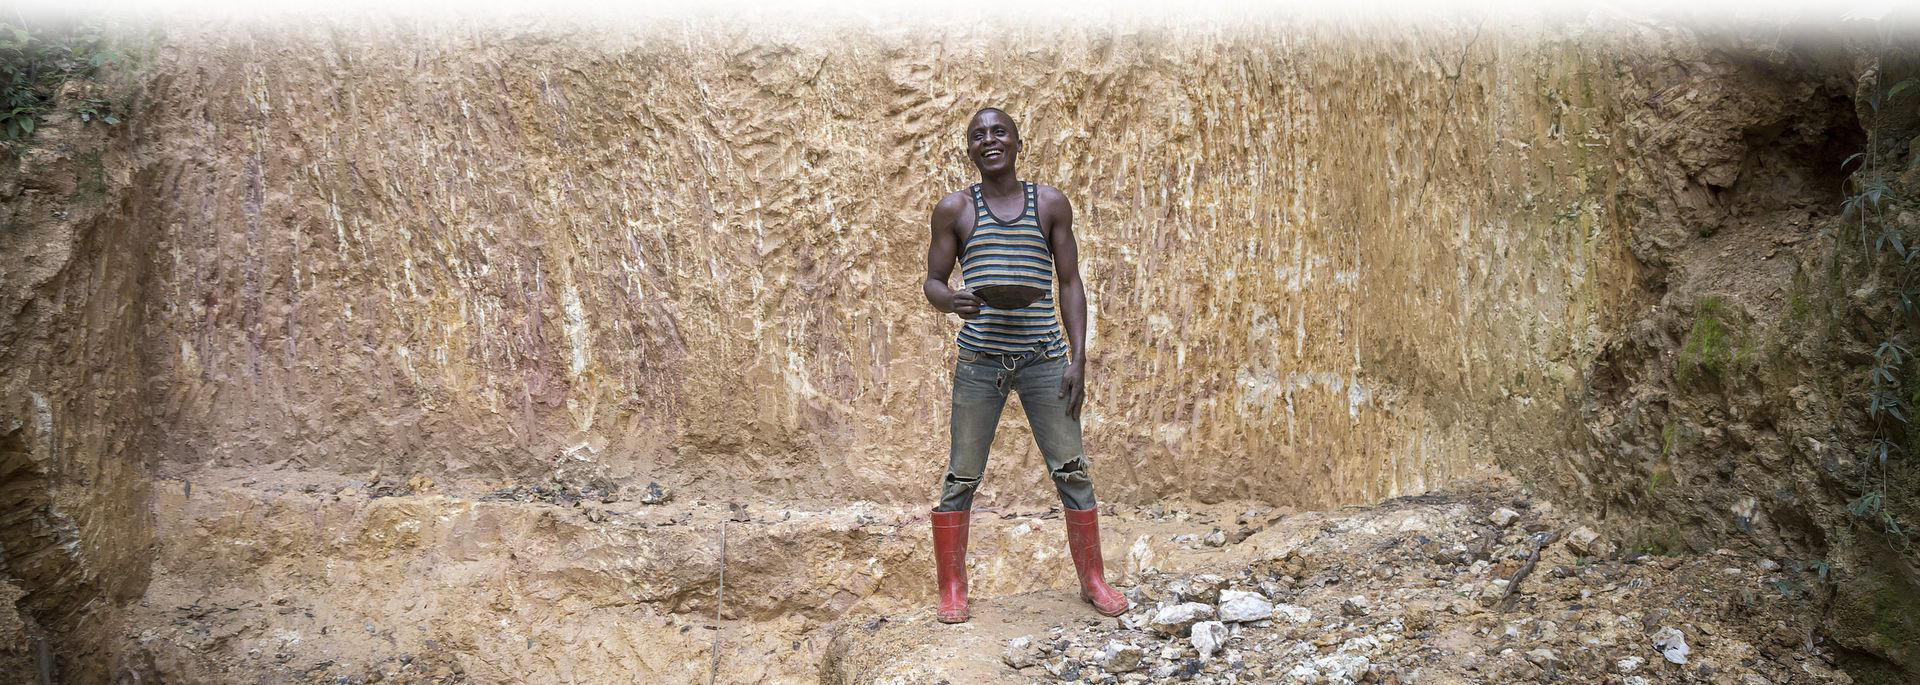 Miner in Red Boots, Photo: Sven Torfinn; courtesy, Impact.